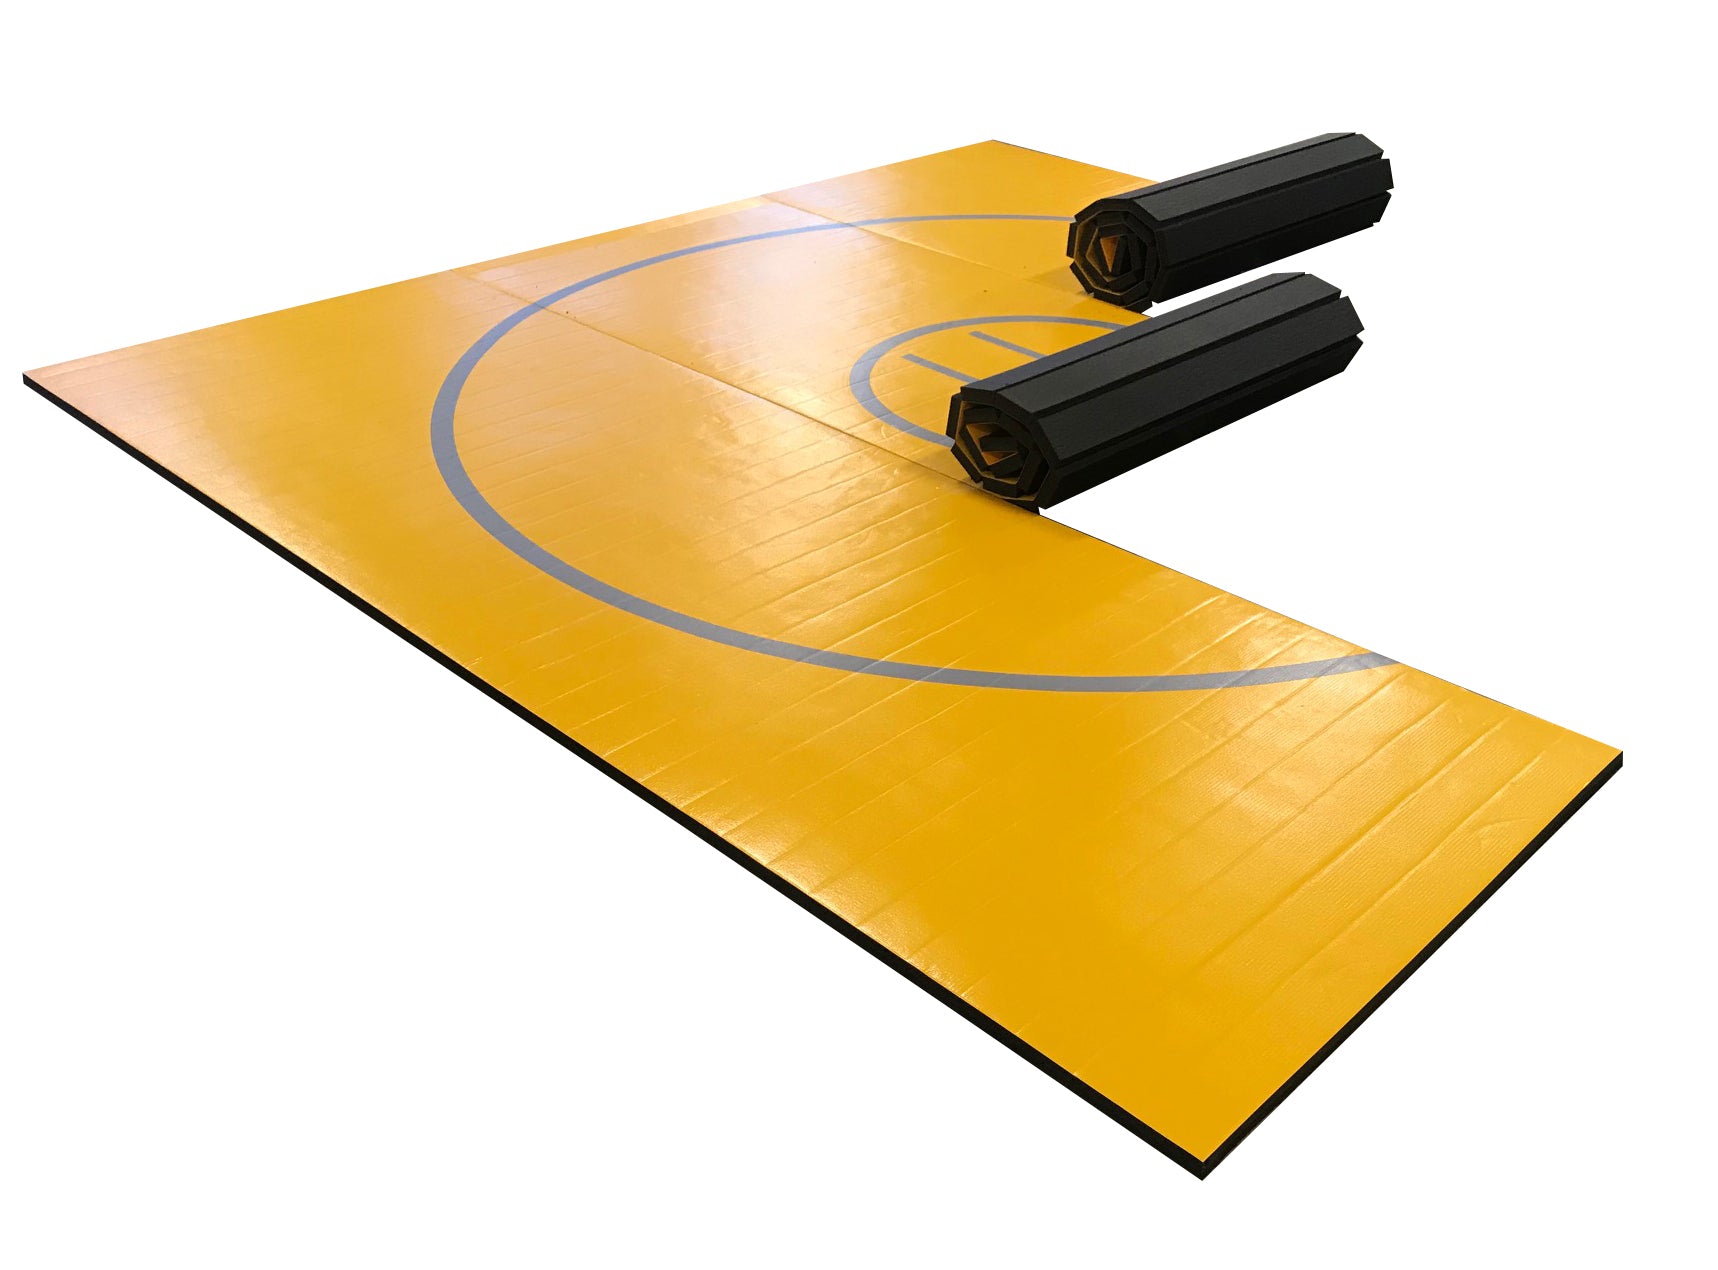 12' x 12' x 1 3/8" Gold and Gray Roll-Up Wrestling Mat